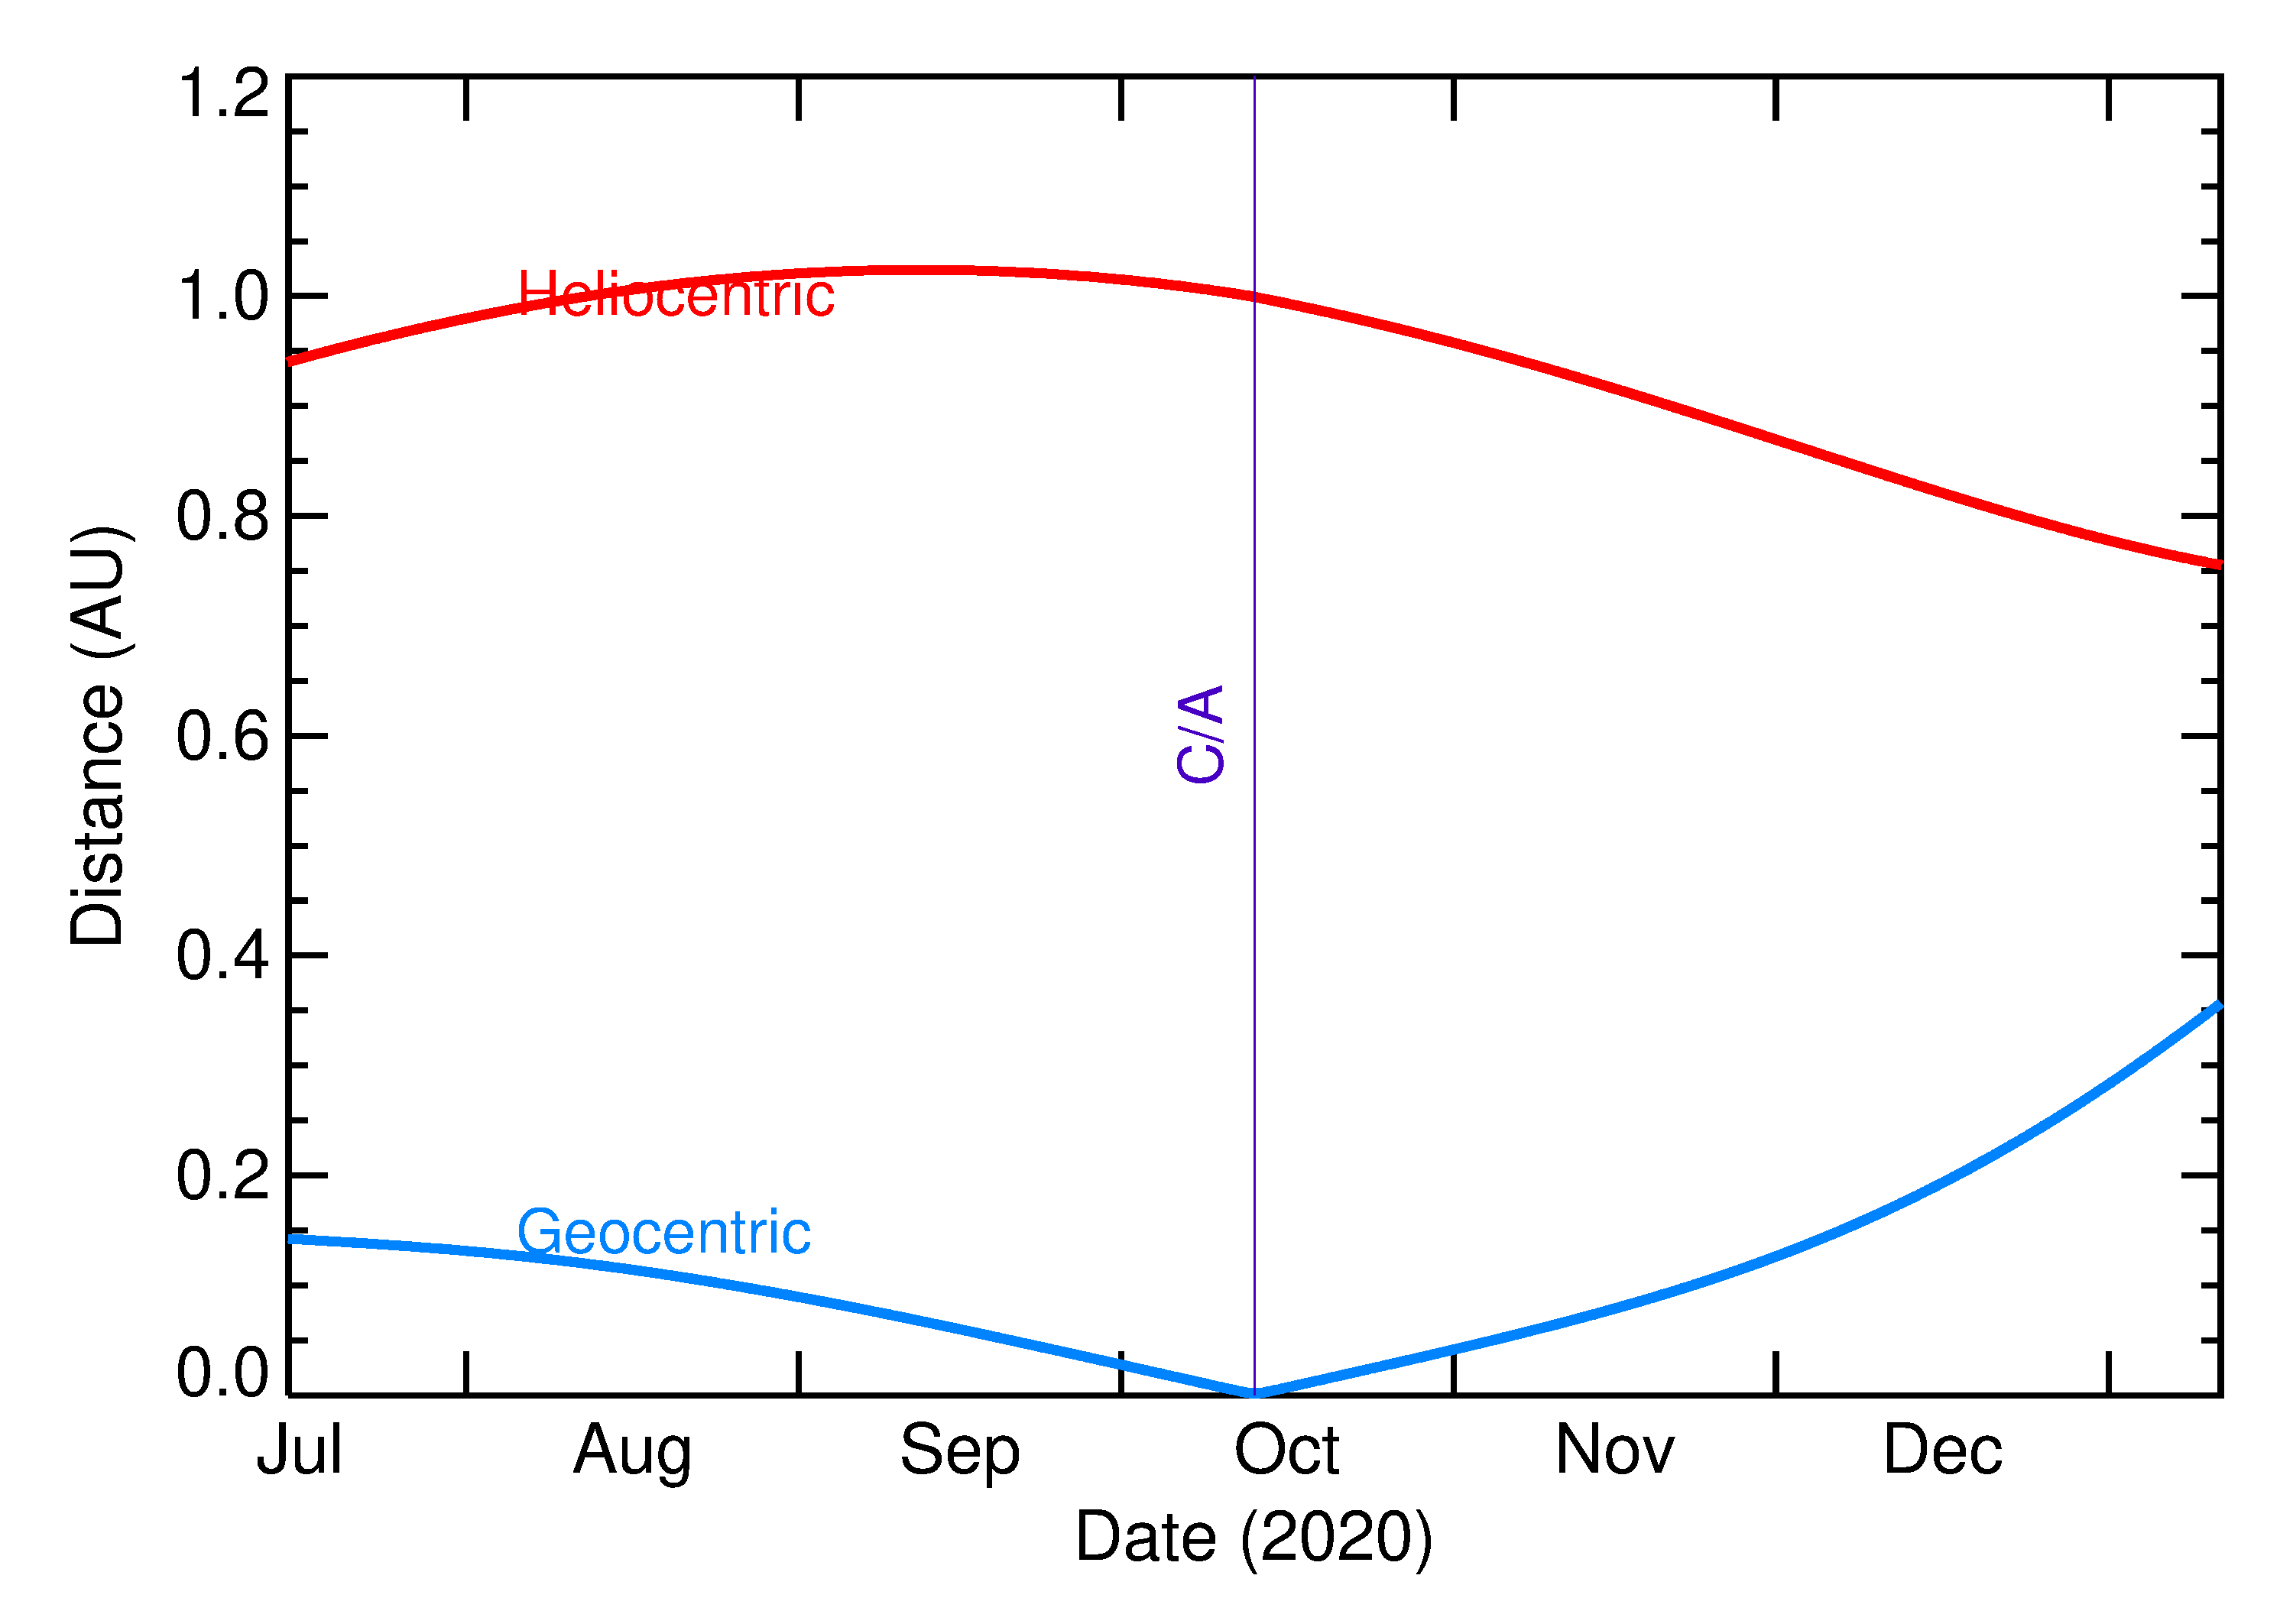 Heliocentric and Geocentric Distances of 2020 TS1 in the months around closest approach